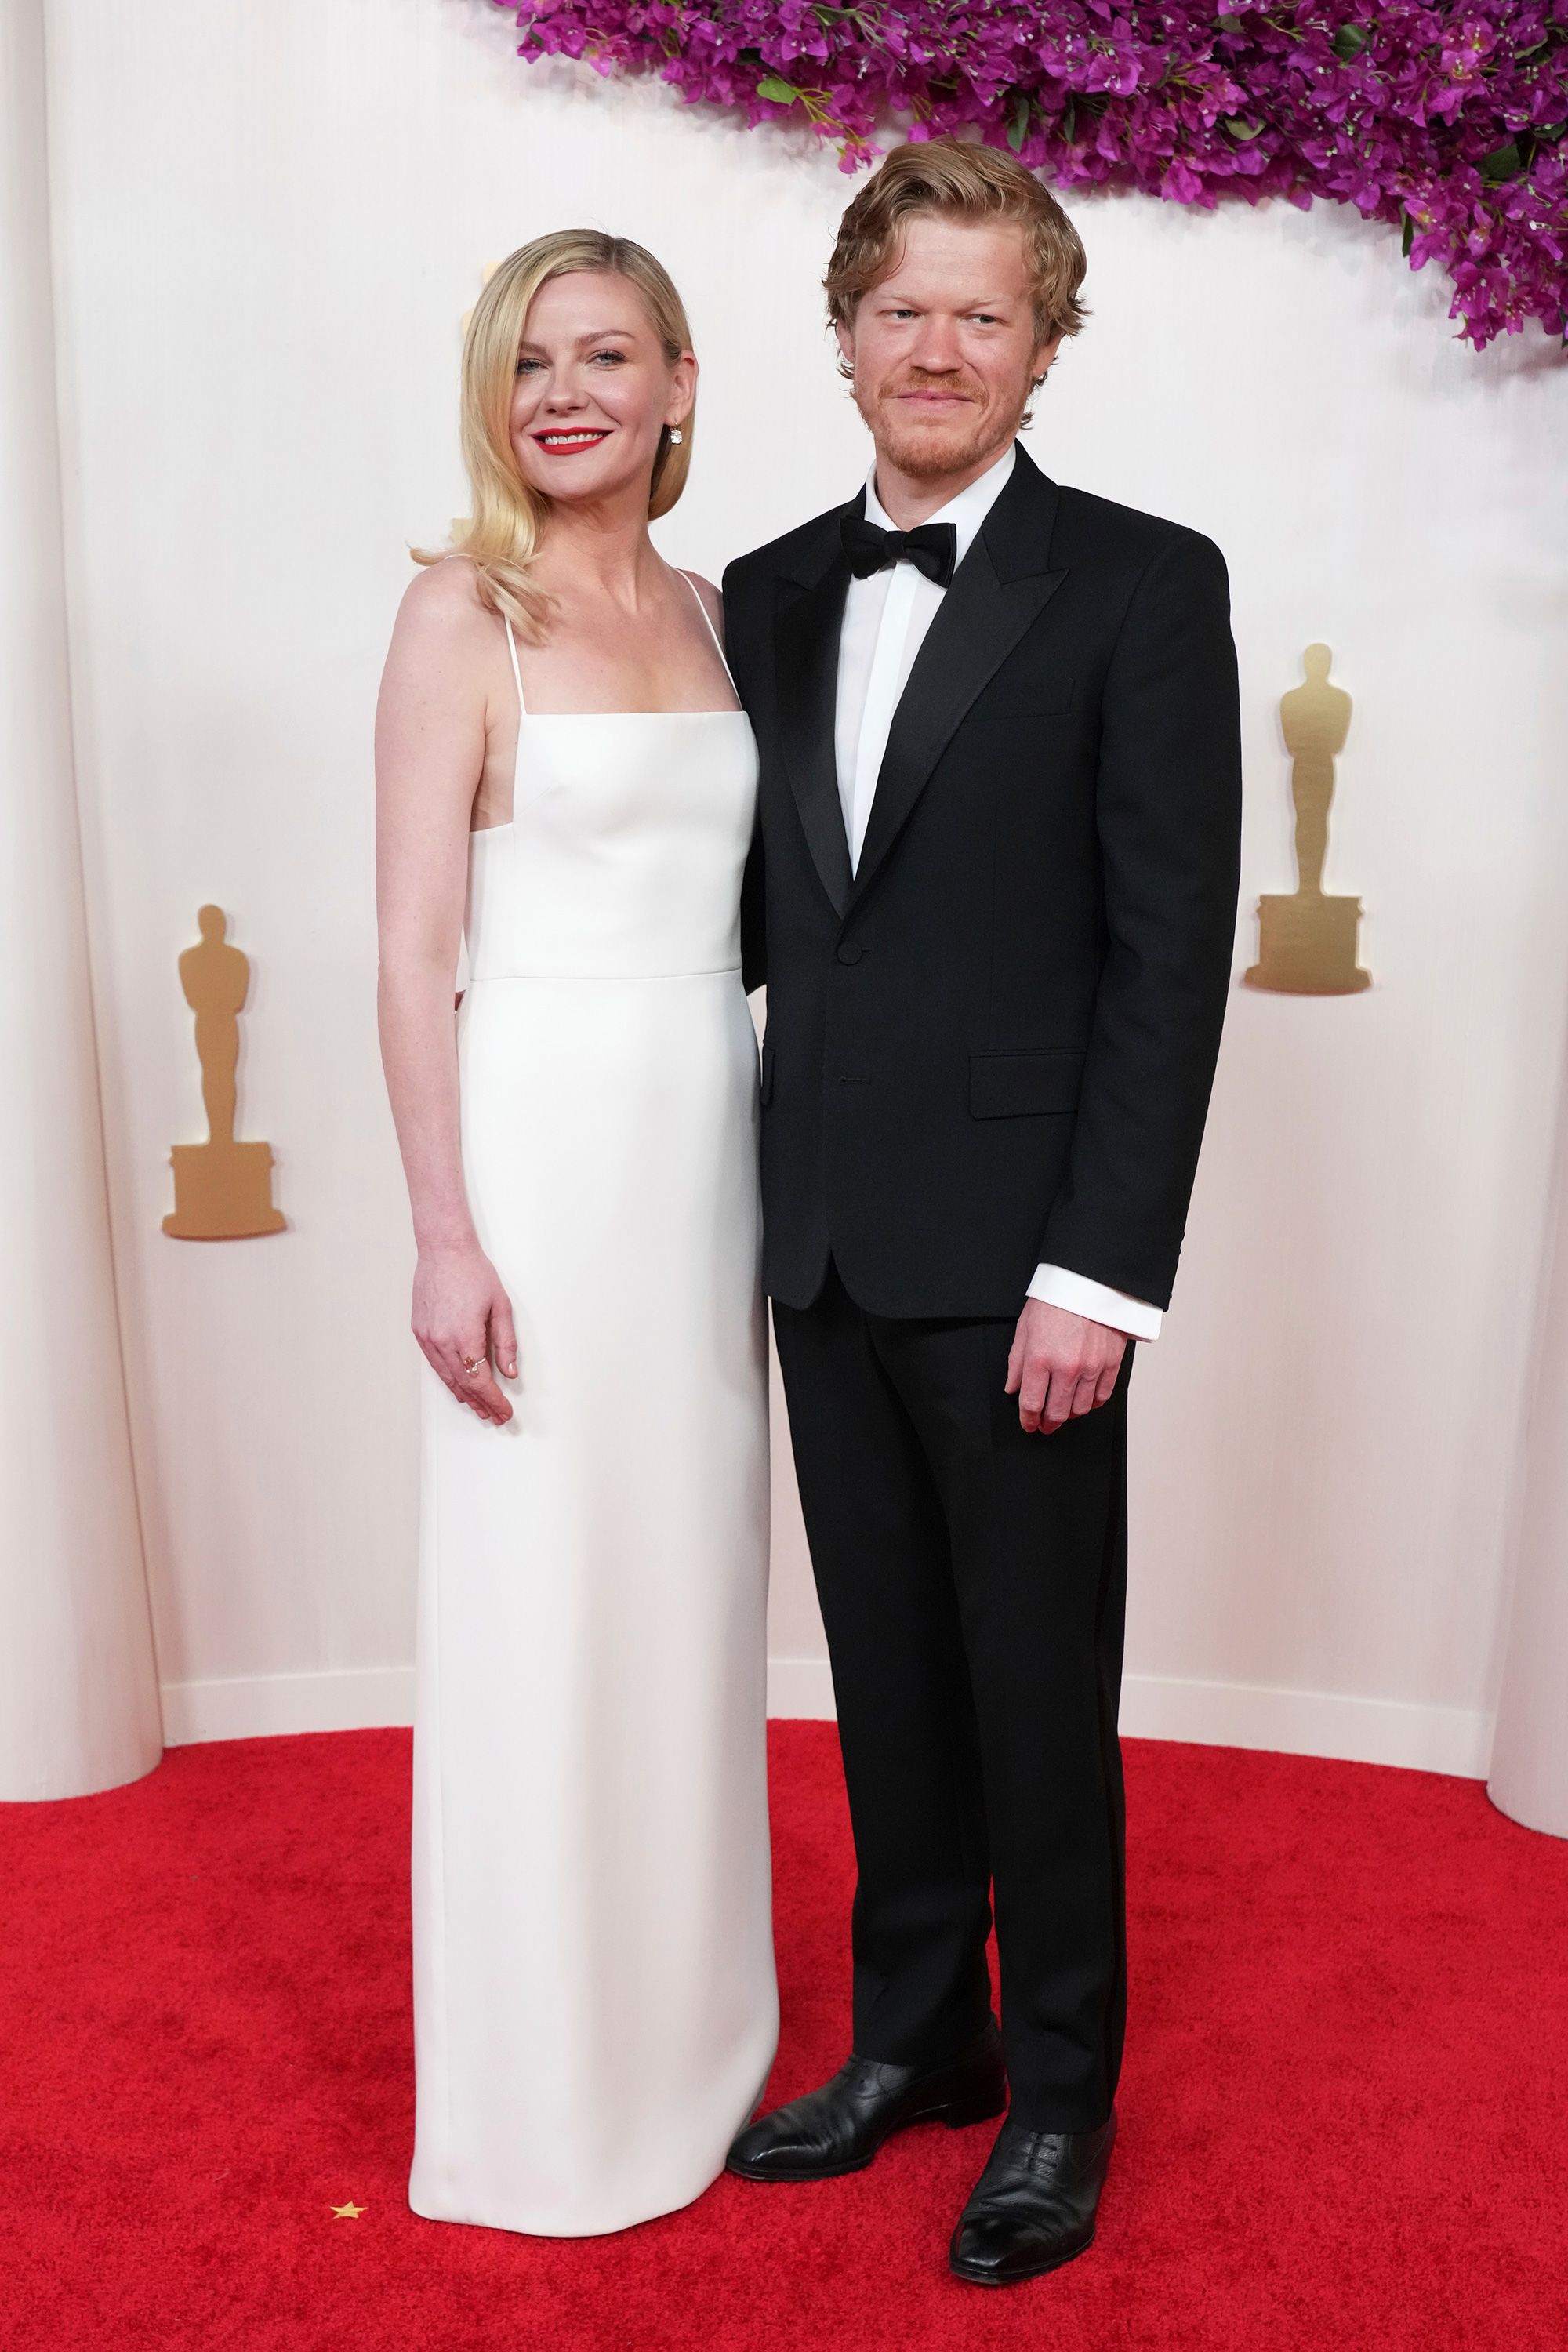 Kirsten Dunst, who arrived alongside husband Jesse Plemons, wore a classy Gucci dress with a sharp-edged neckline and a sleek floor-length silhouette. The actor completed the look with Fred Leighton jewelry.